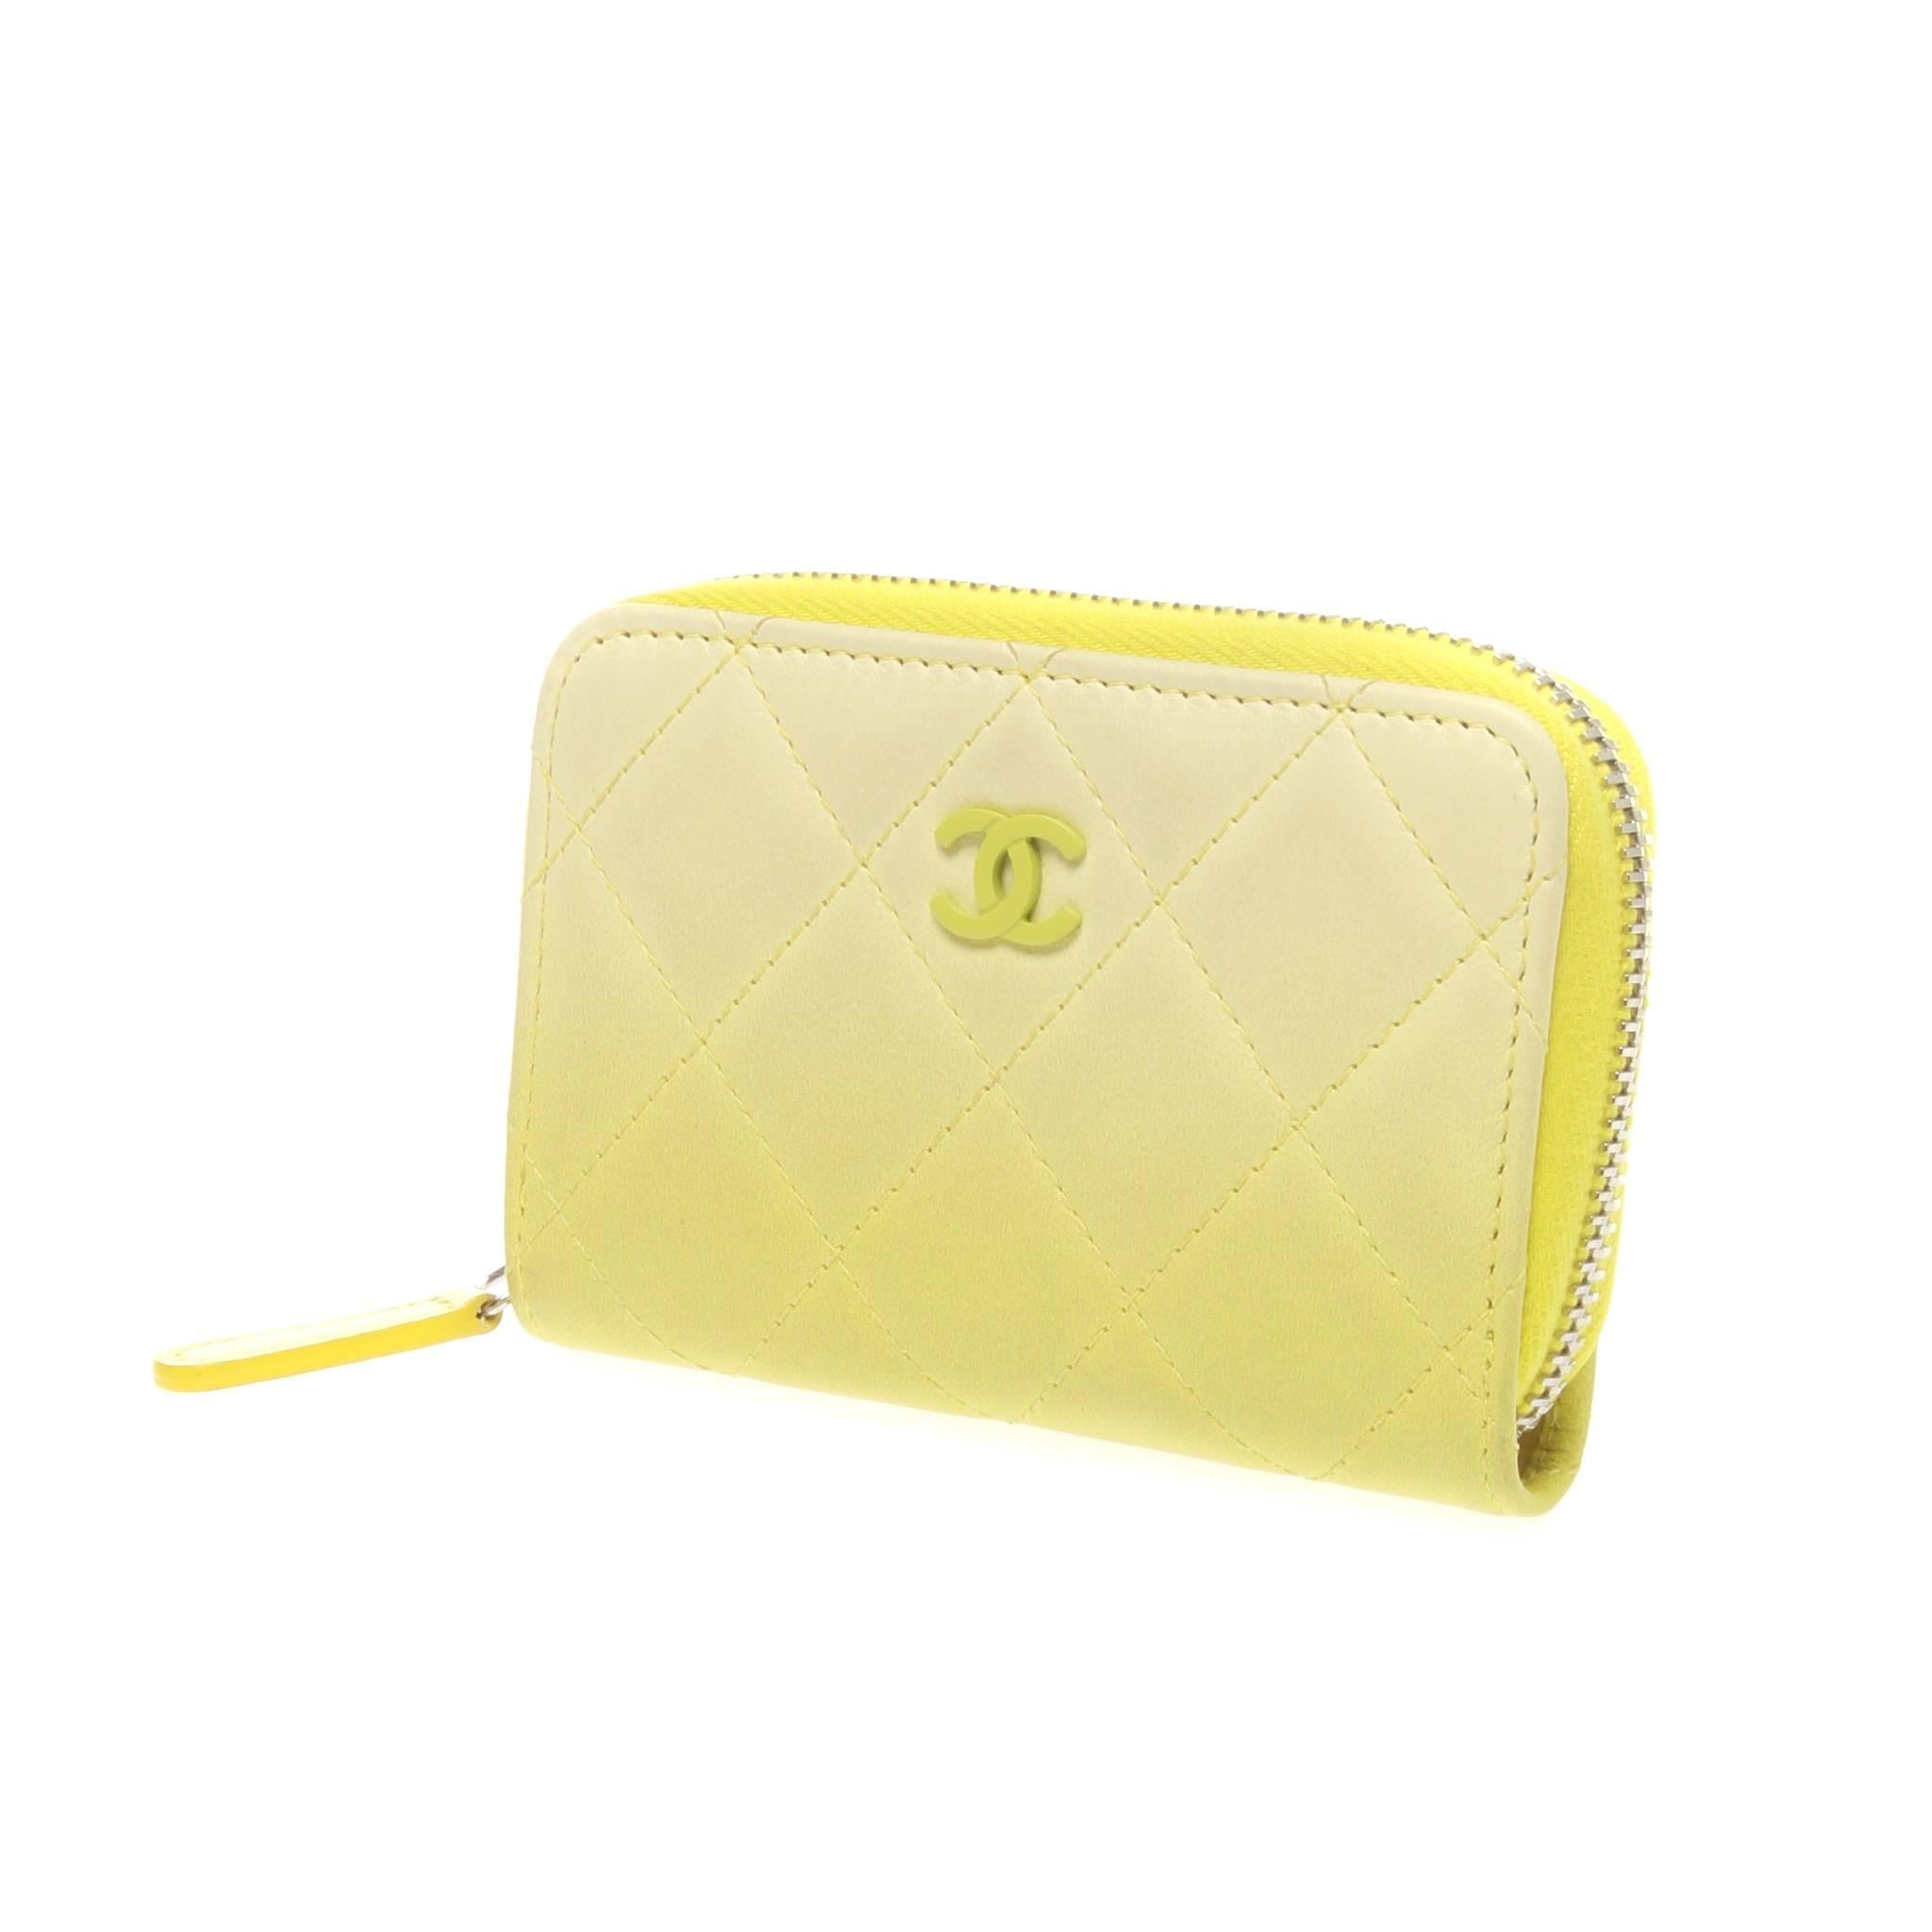 Chanel lambskin Matelasse coin purse
An eye-catching Chanel lambskin Matelasse coin purse.
It consists of three compartments which allow for good organisation of coins, notes and cards.
Highly recommended gift to Pamper yourself.
Features: Yellow